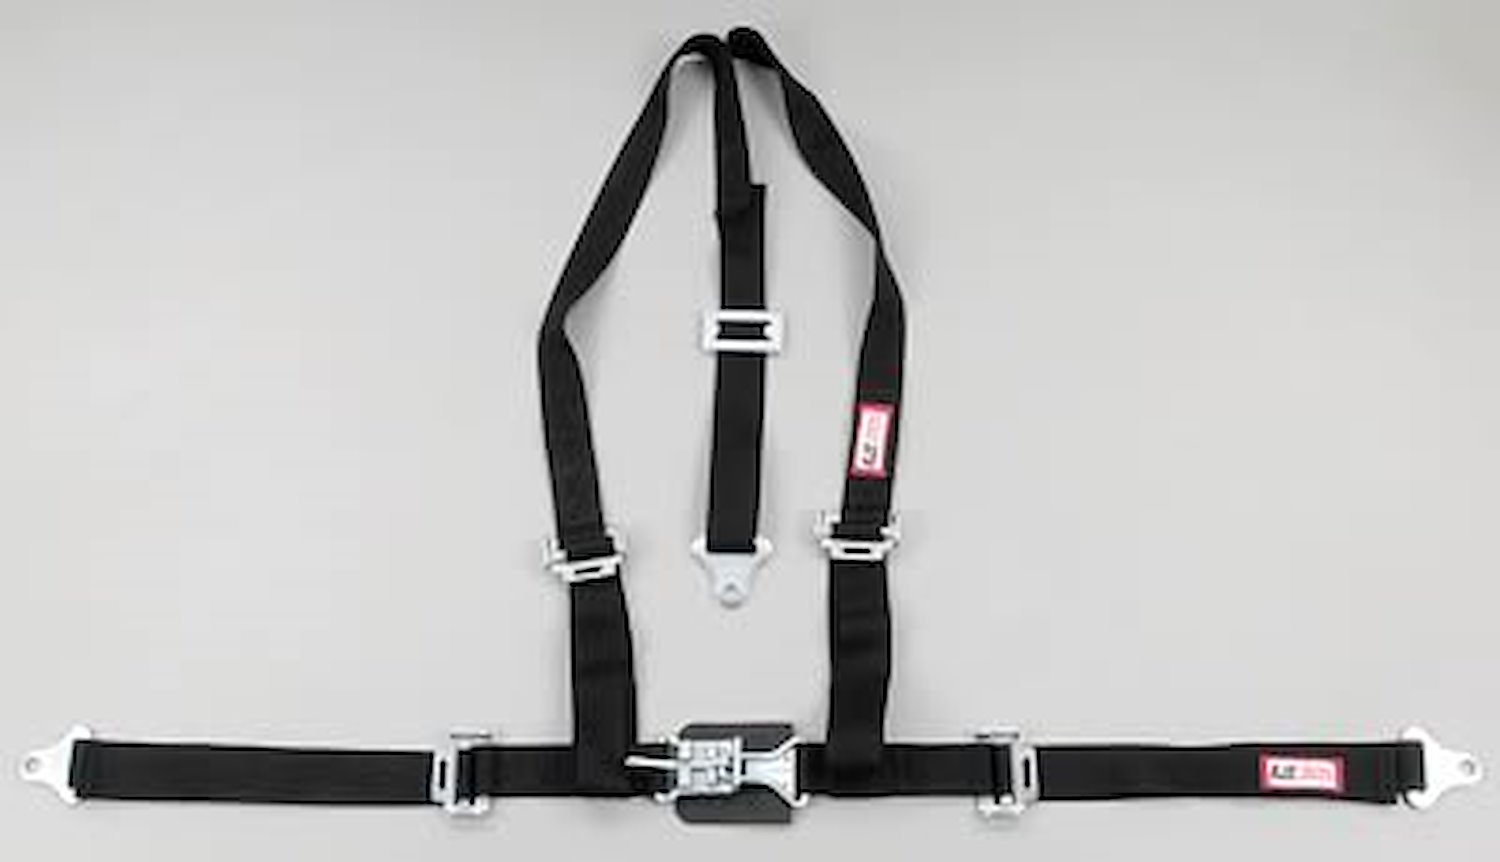 NON-SFI L&L HARNESS 2 PULL UP Lap Belt SEWN IN 2 S.H. V ROLL BAR Mount ALL SNAP ENDS GRAY